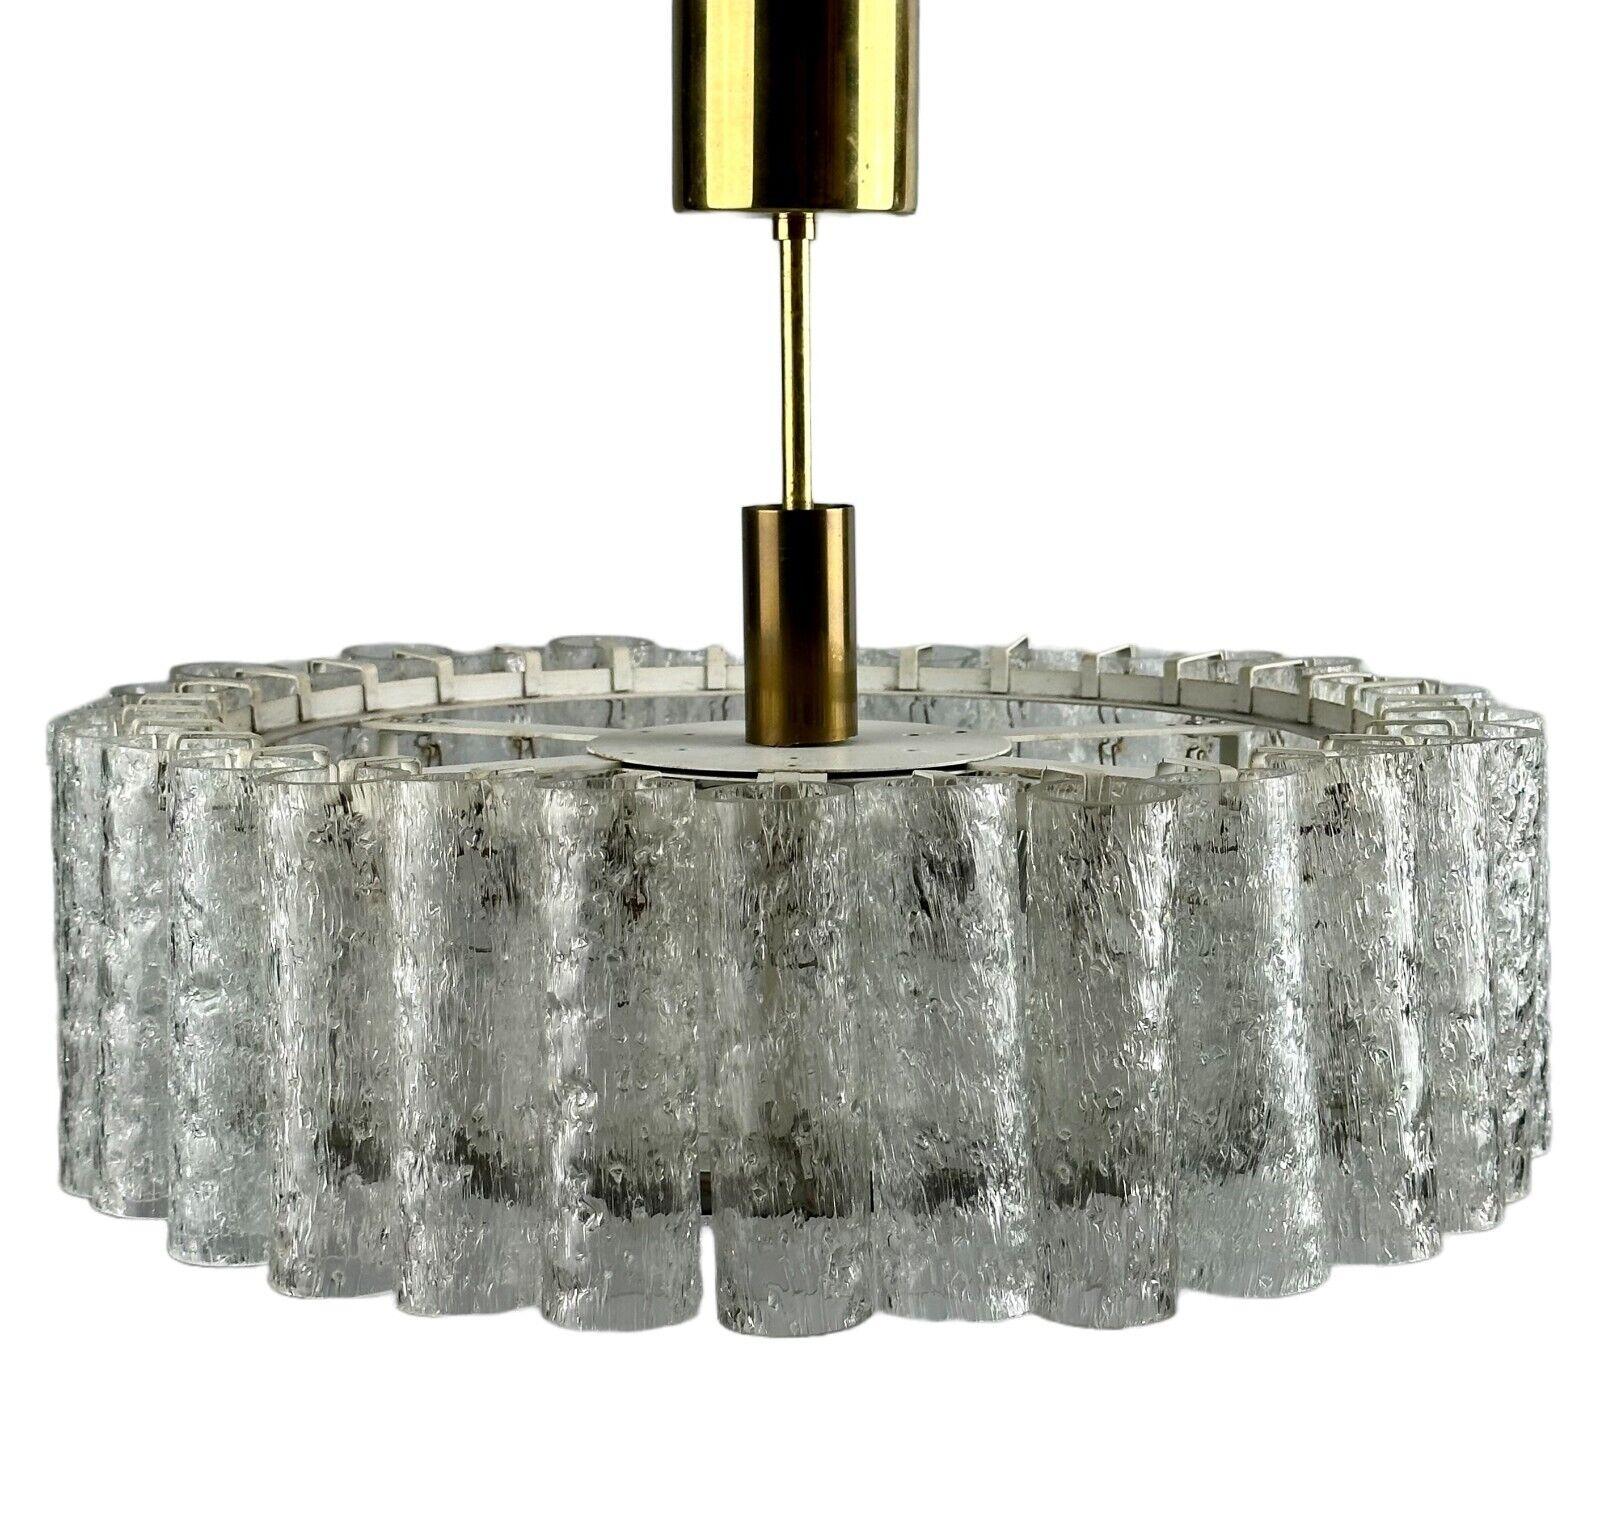 60s 70s chandelier ceiling lamp Doria Leuchten Germany Ice glass design

Object: chandelier

Manufacturer: Doria

Condition: good

Age: around 1960-1970

Dimensions:

Diameter = 45cm
Height = 37cm

Material: glass, brass, metal

Other notes:

6x E27